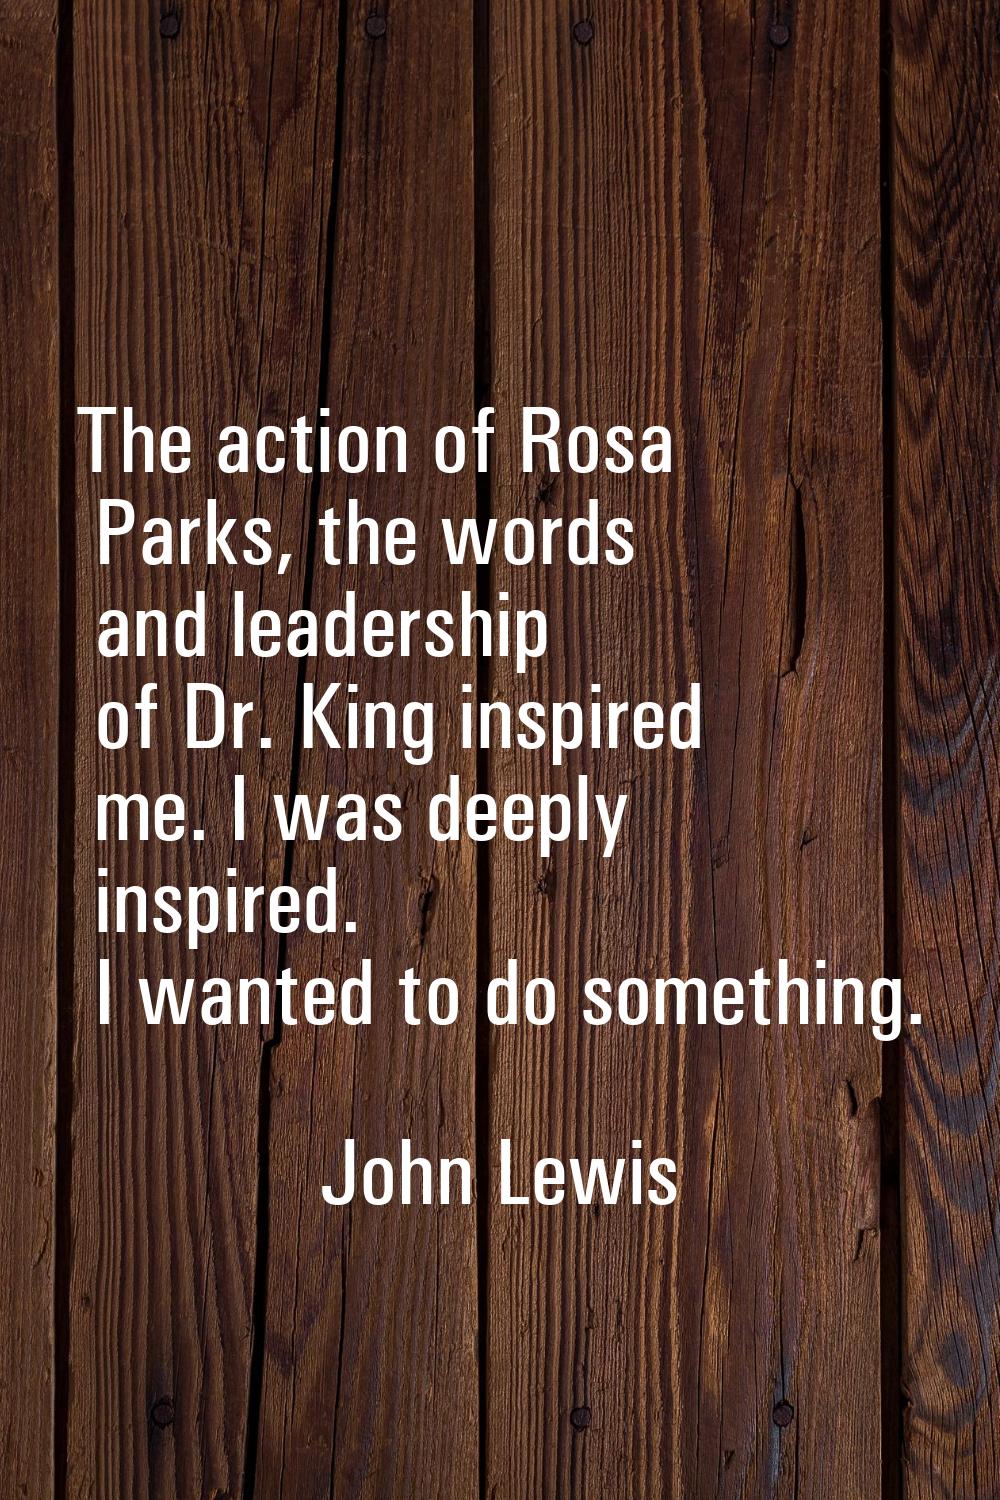 The action of Rosa Parks, the words and leadership of Dr. King inspired me. I was deeply inspired. 